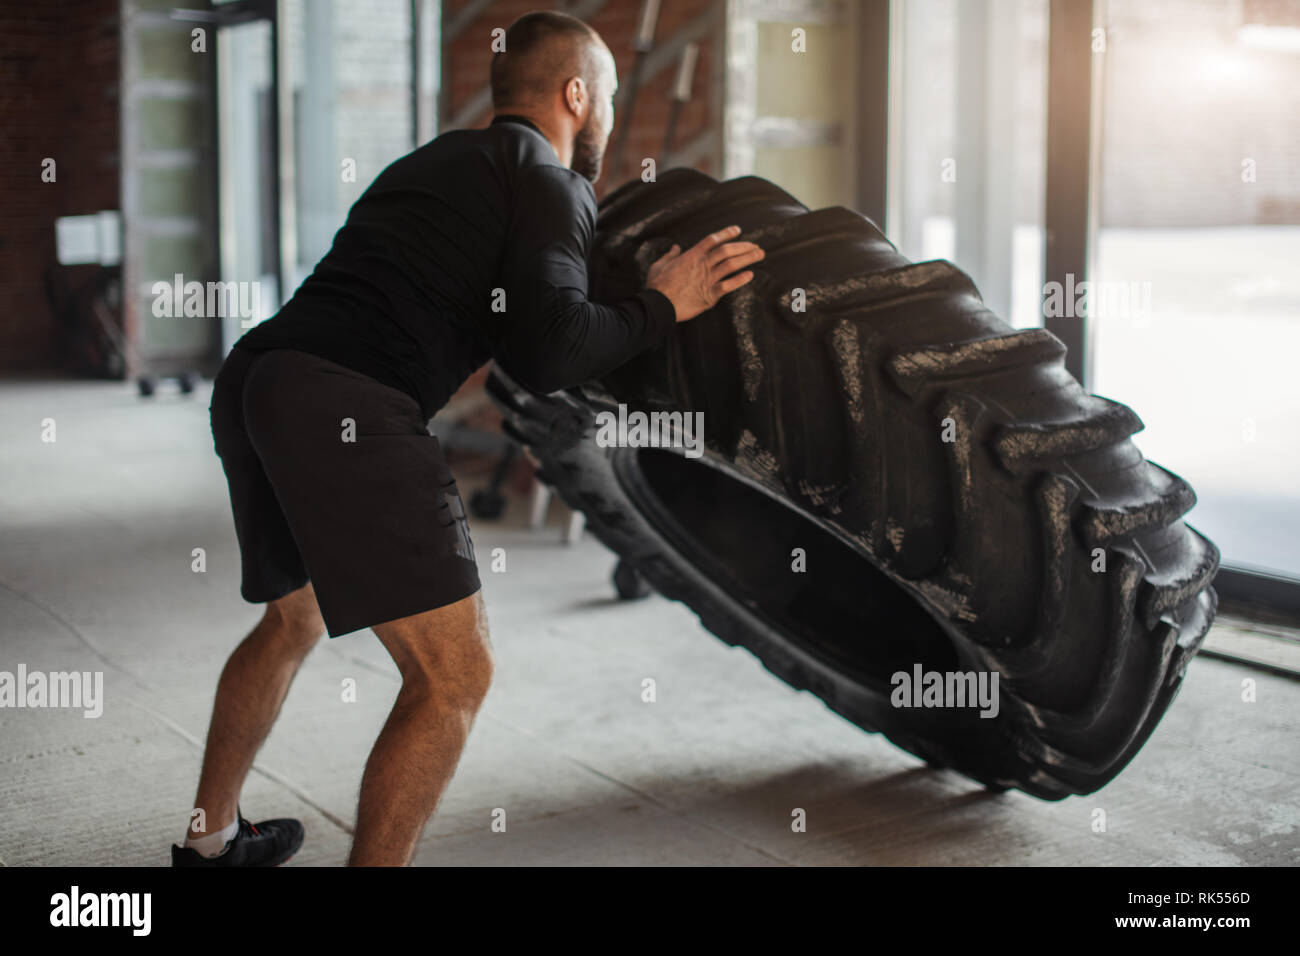 CrossFit Tire Technique. Powerful bodybuilder demonstrates rules and order of training with improvised powerlifting element in fitness club Stock Photo